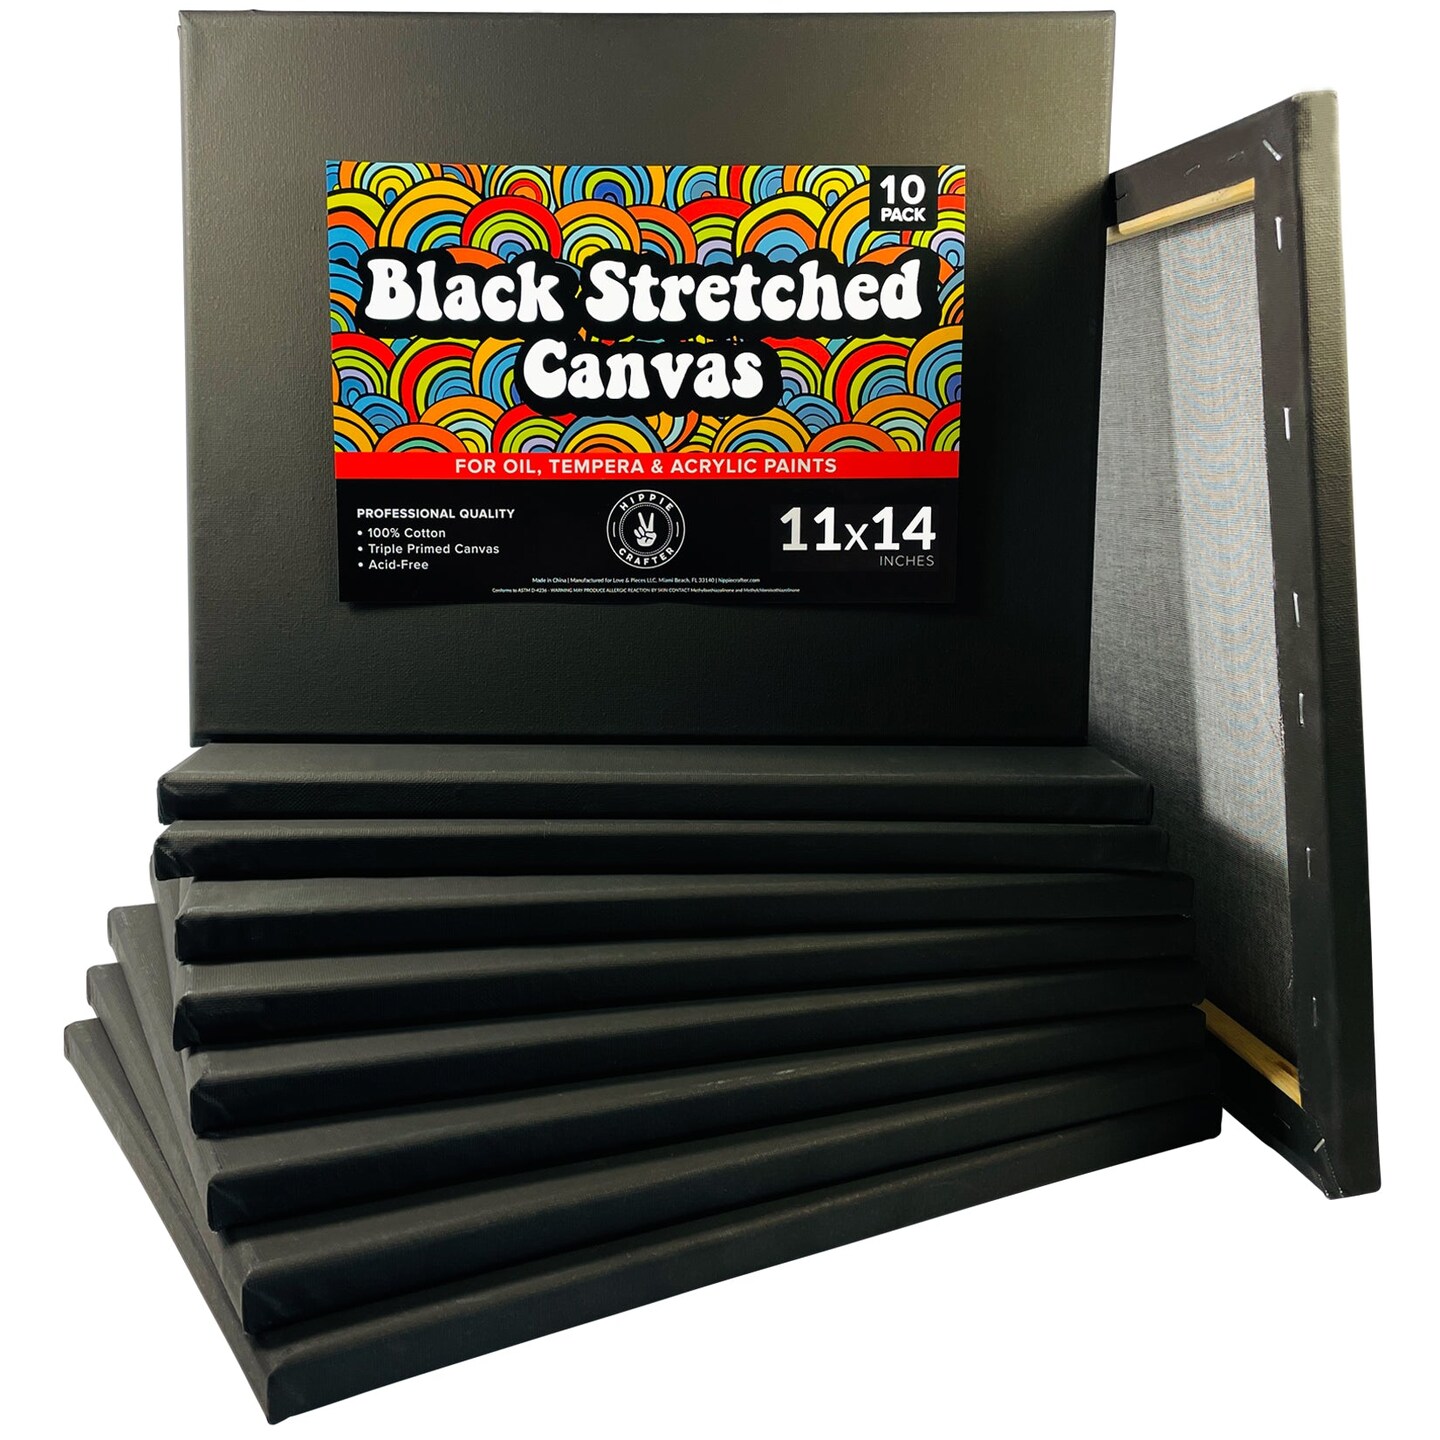 Stretched Black Canvas For Painting Bulk 10 Pack Small Canvases For